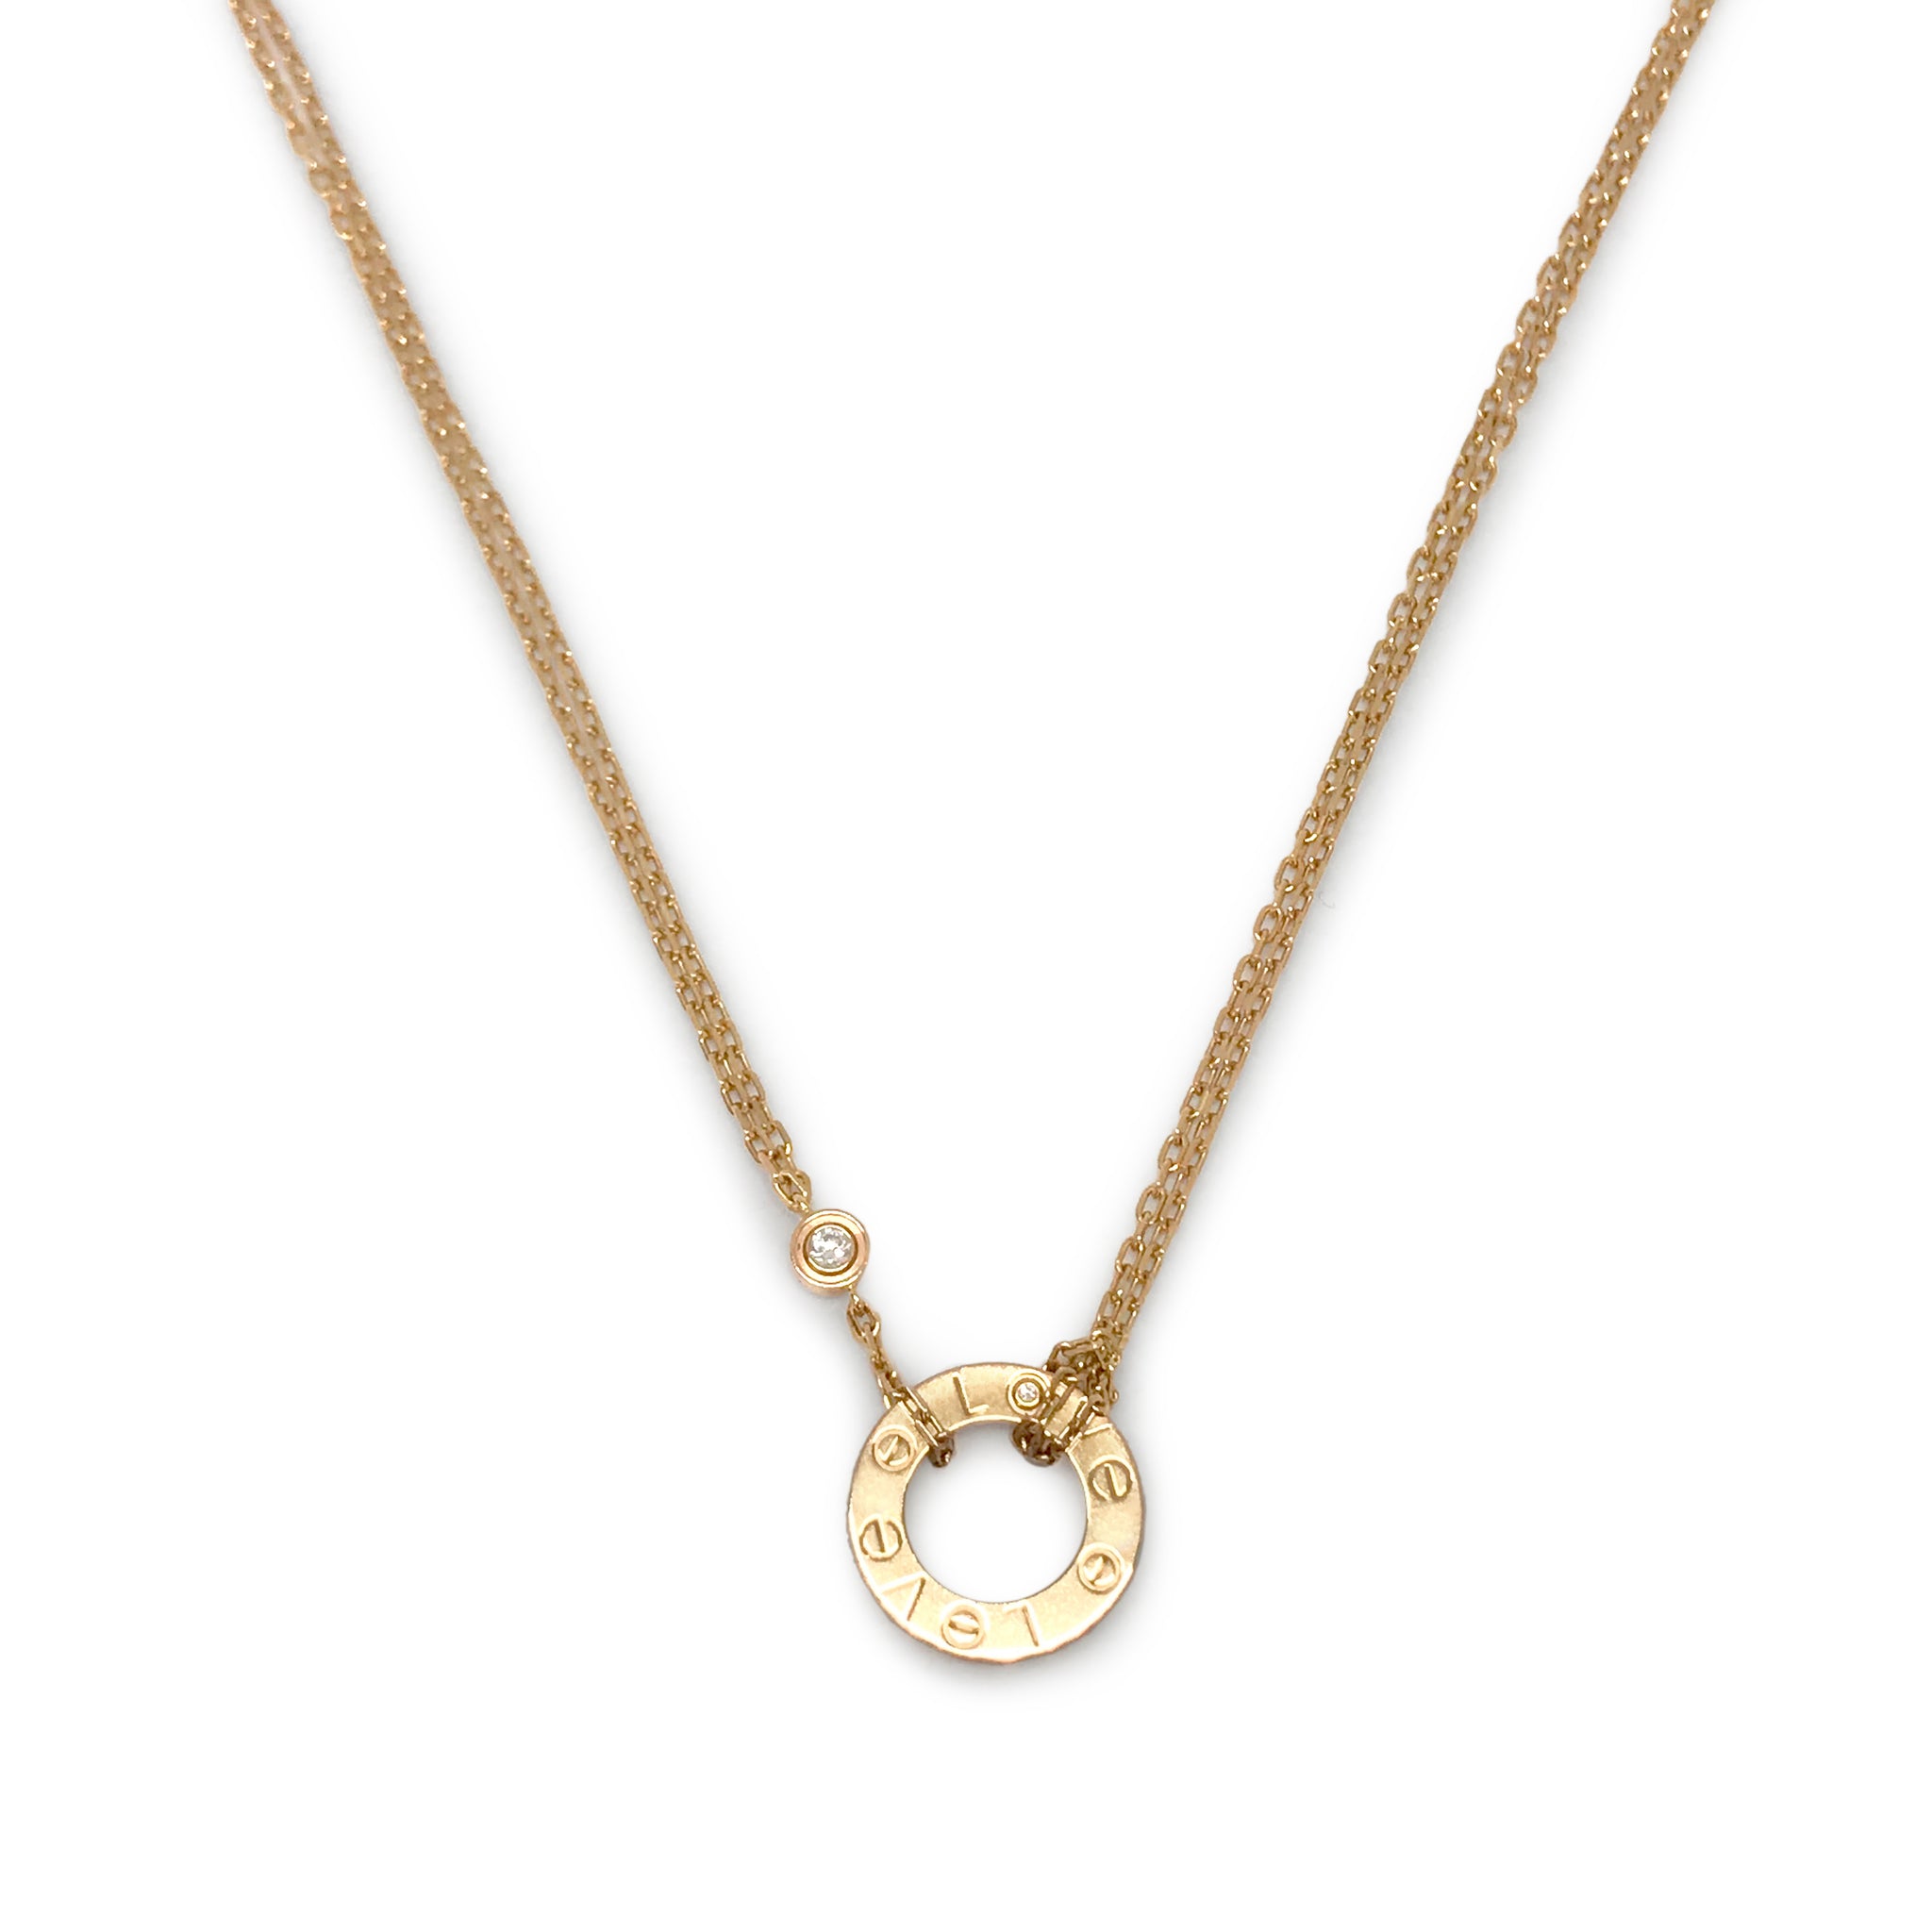 cartier 18k yellow gold love necklace